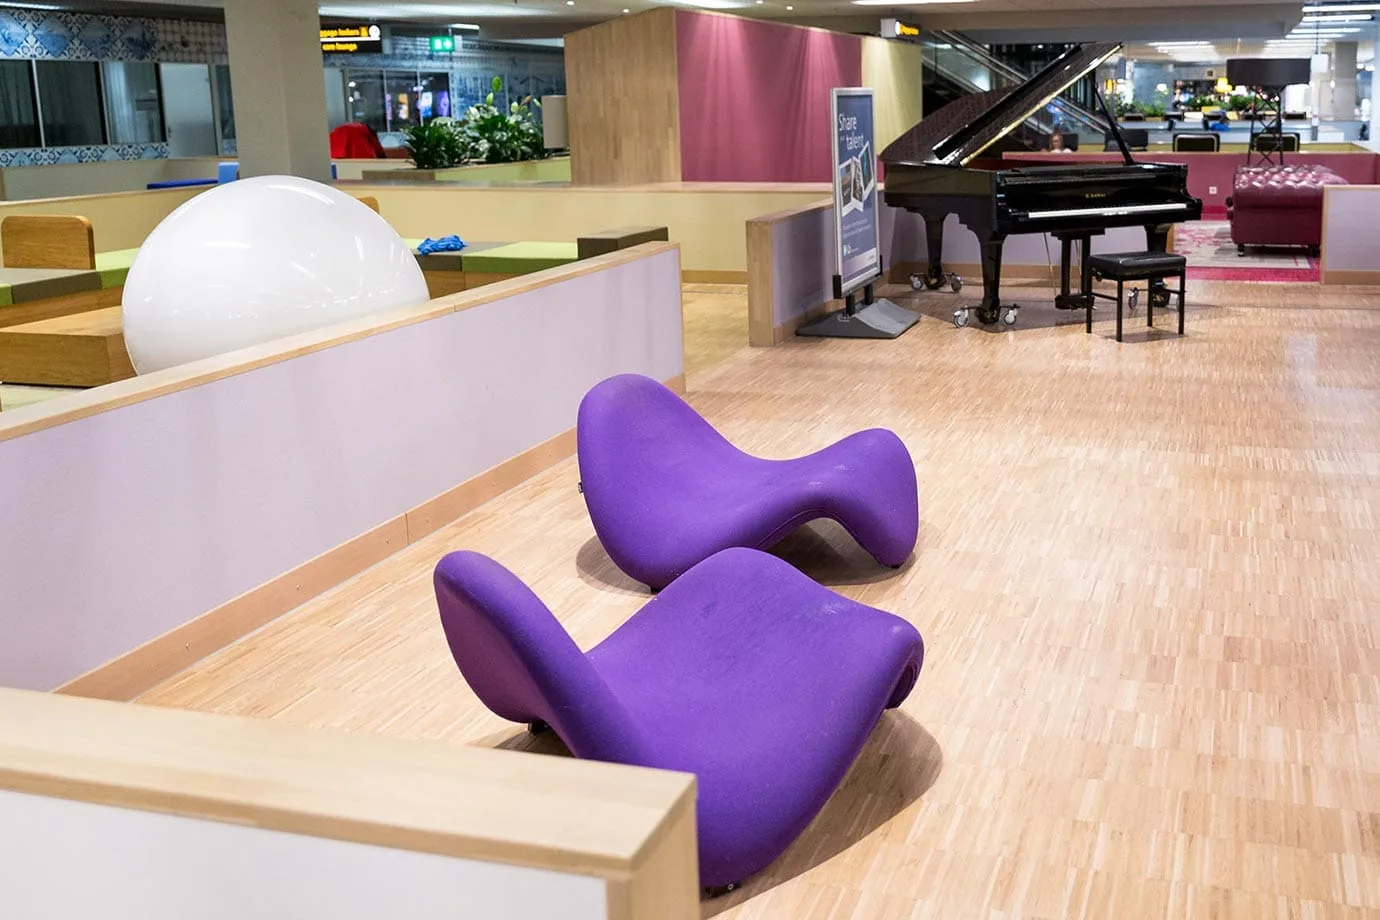 Piano at Schiphol Airport